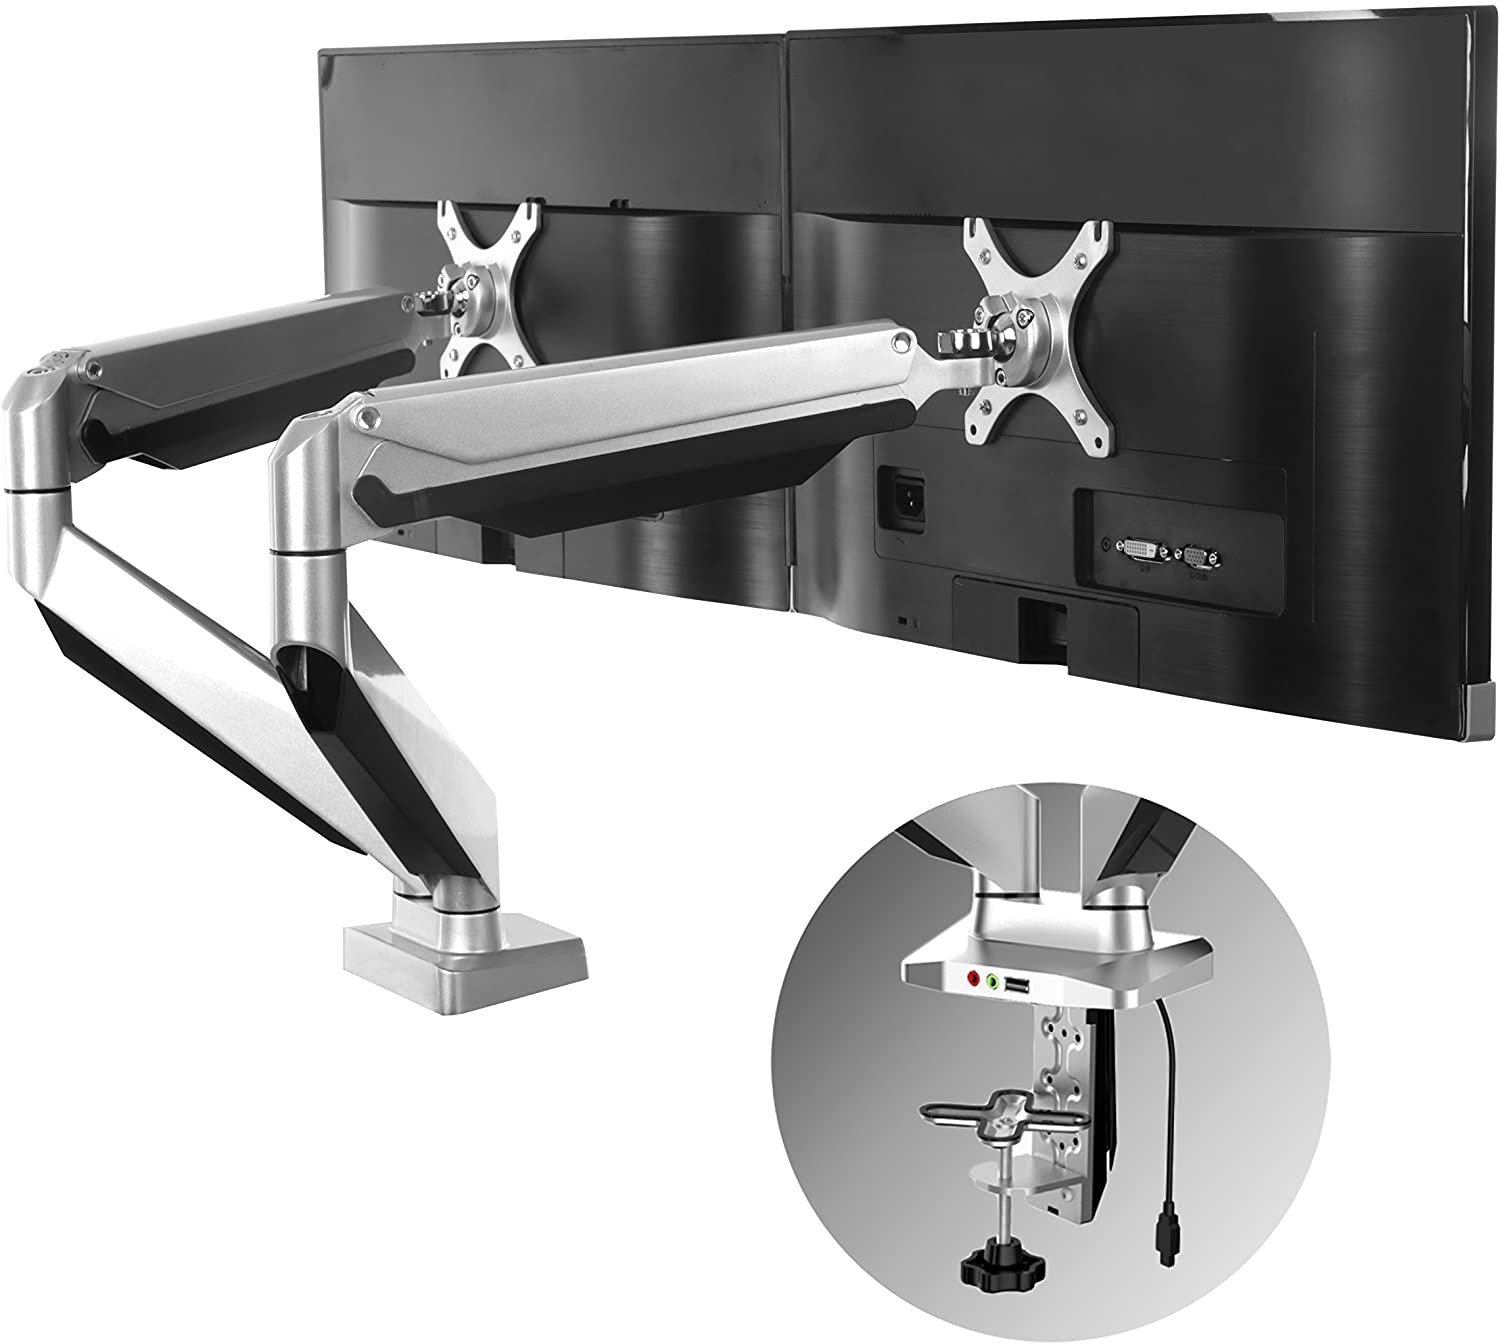 Dual Monitor Arm for Standing Desks  Max Weight 20 Pounds Per Arm -  MojoDesk